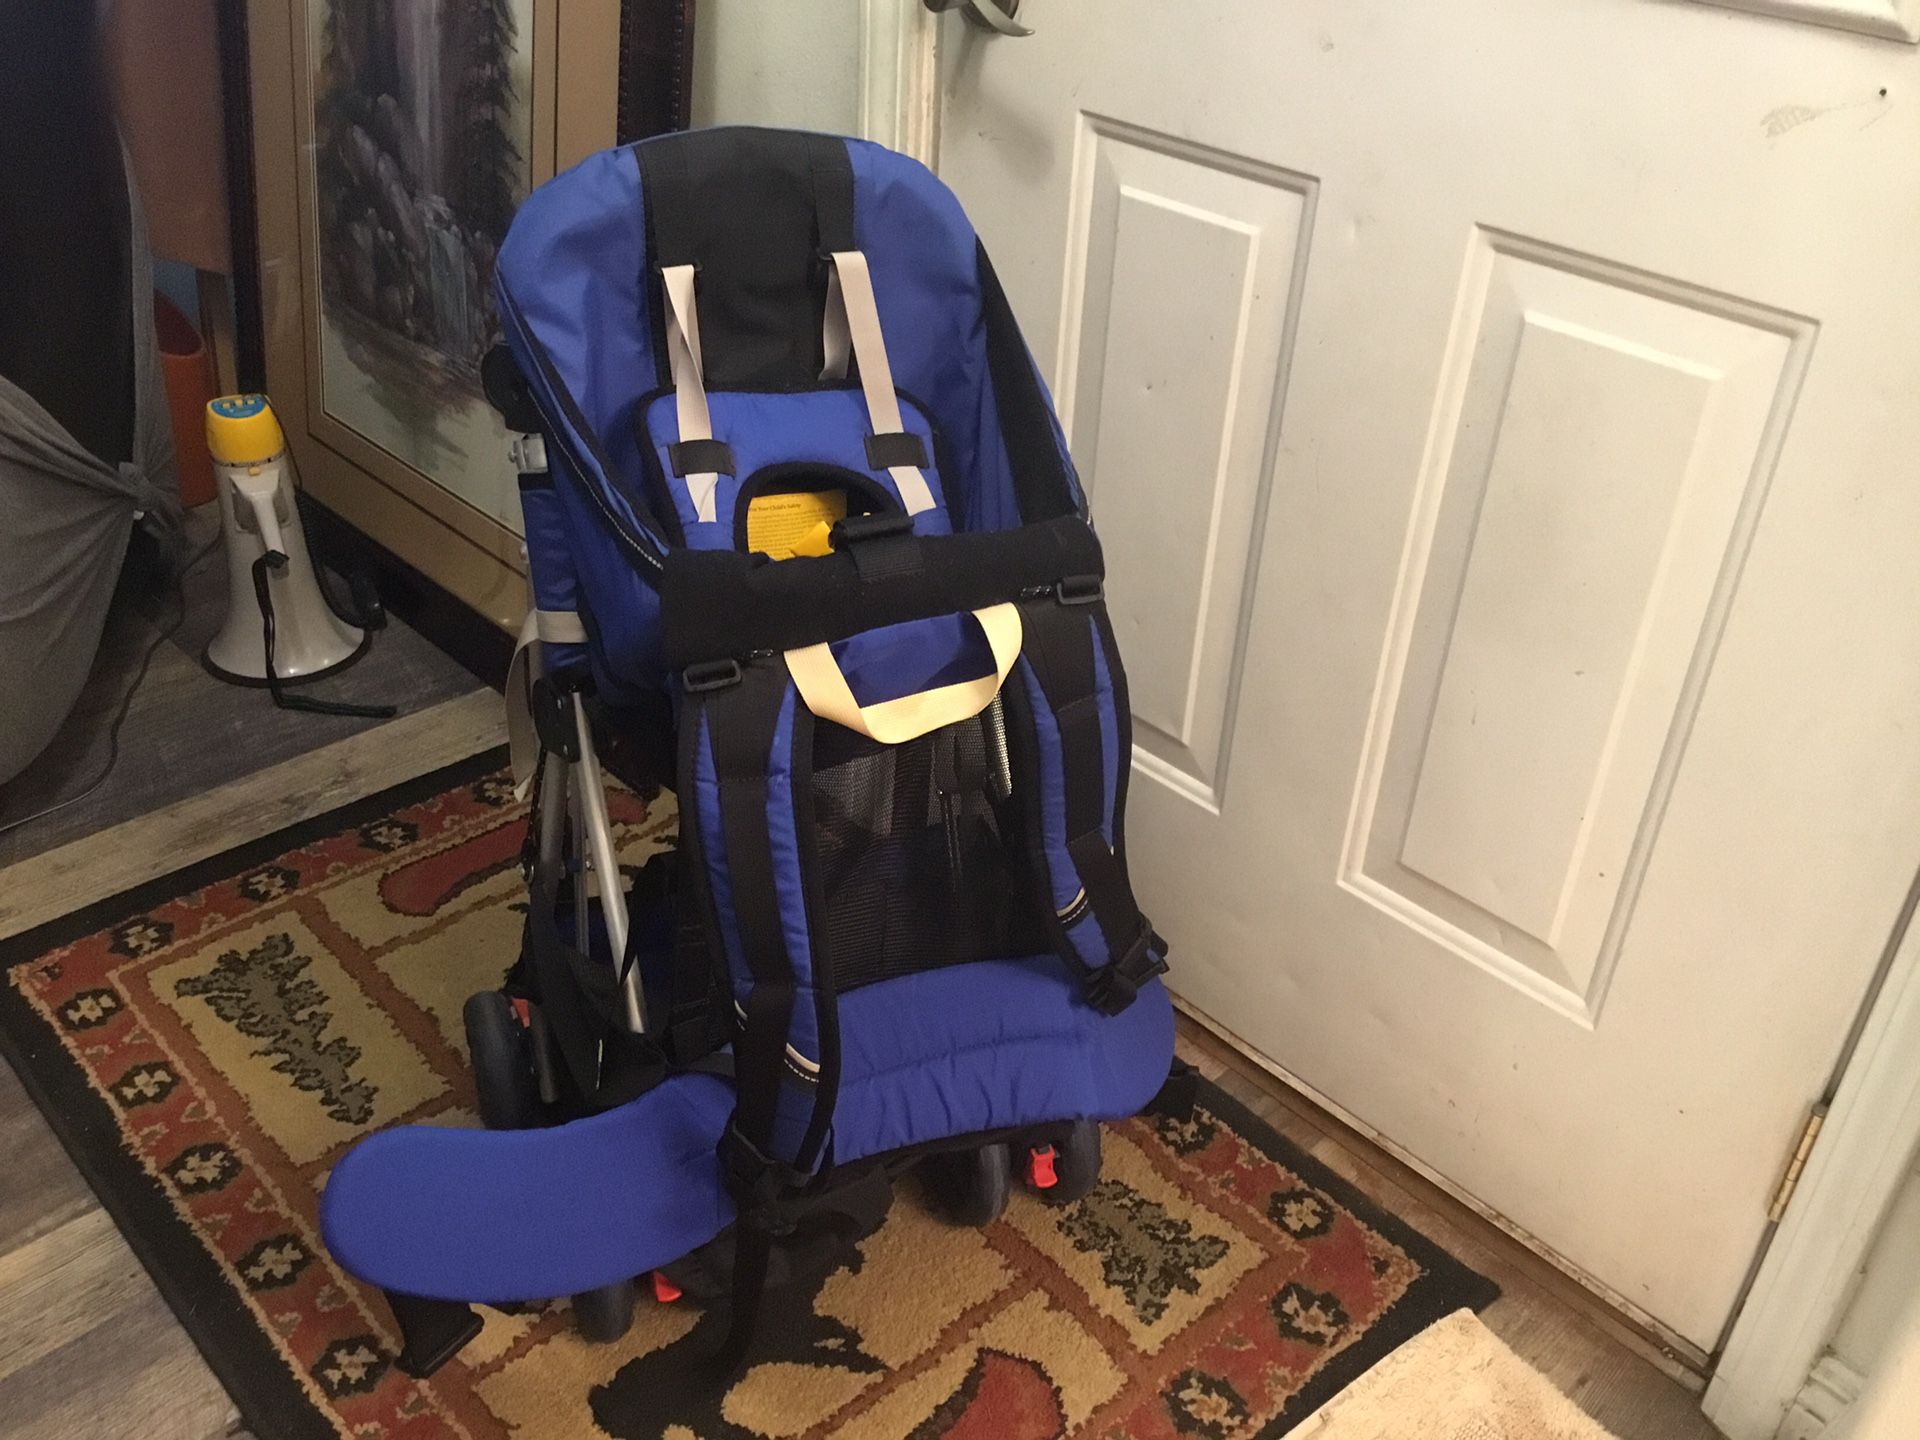 This is a back pack and Stroller